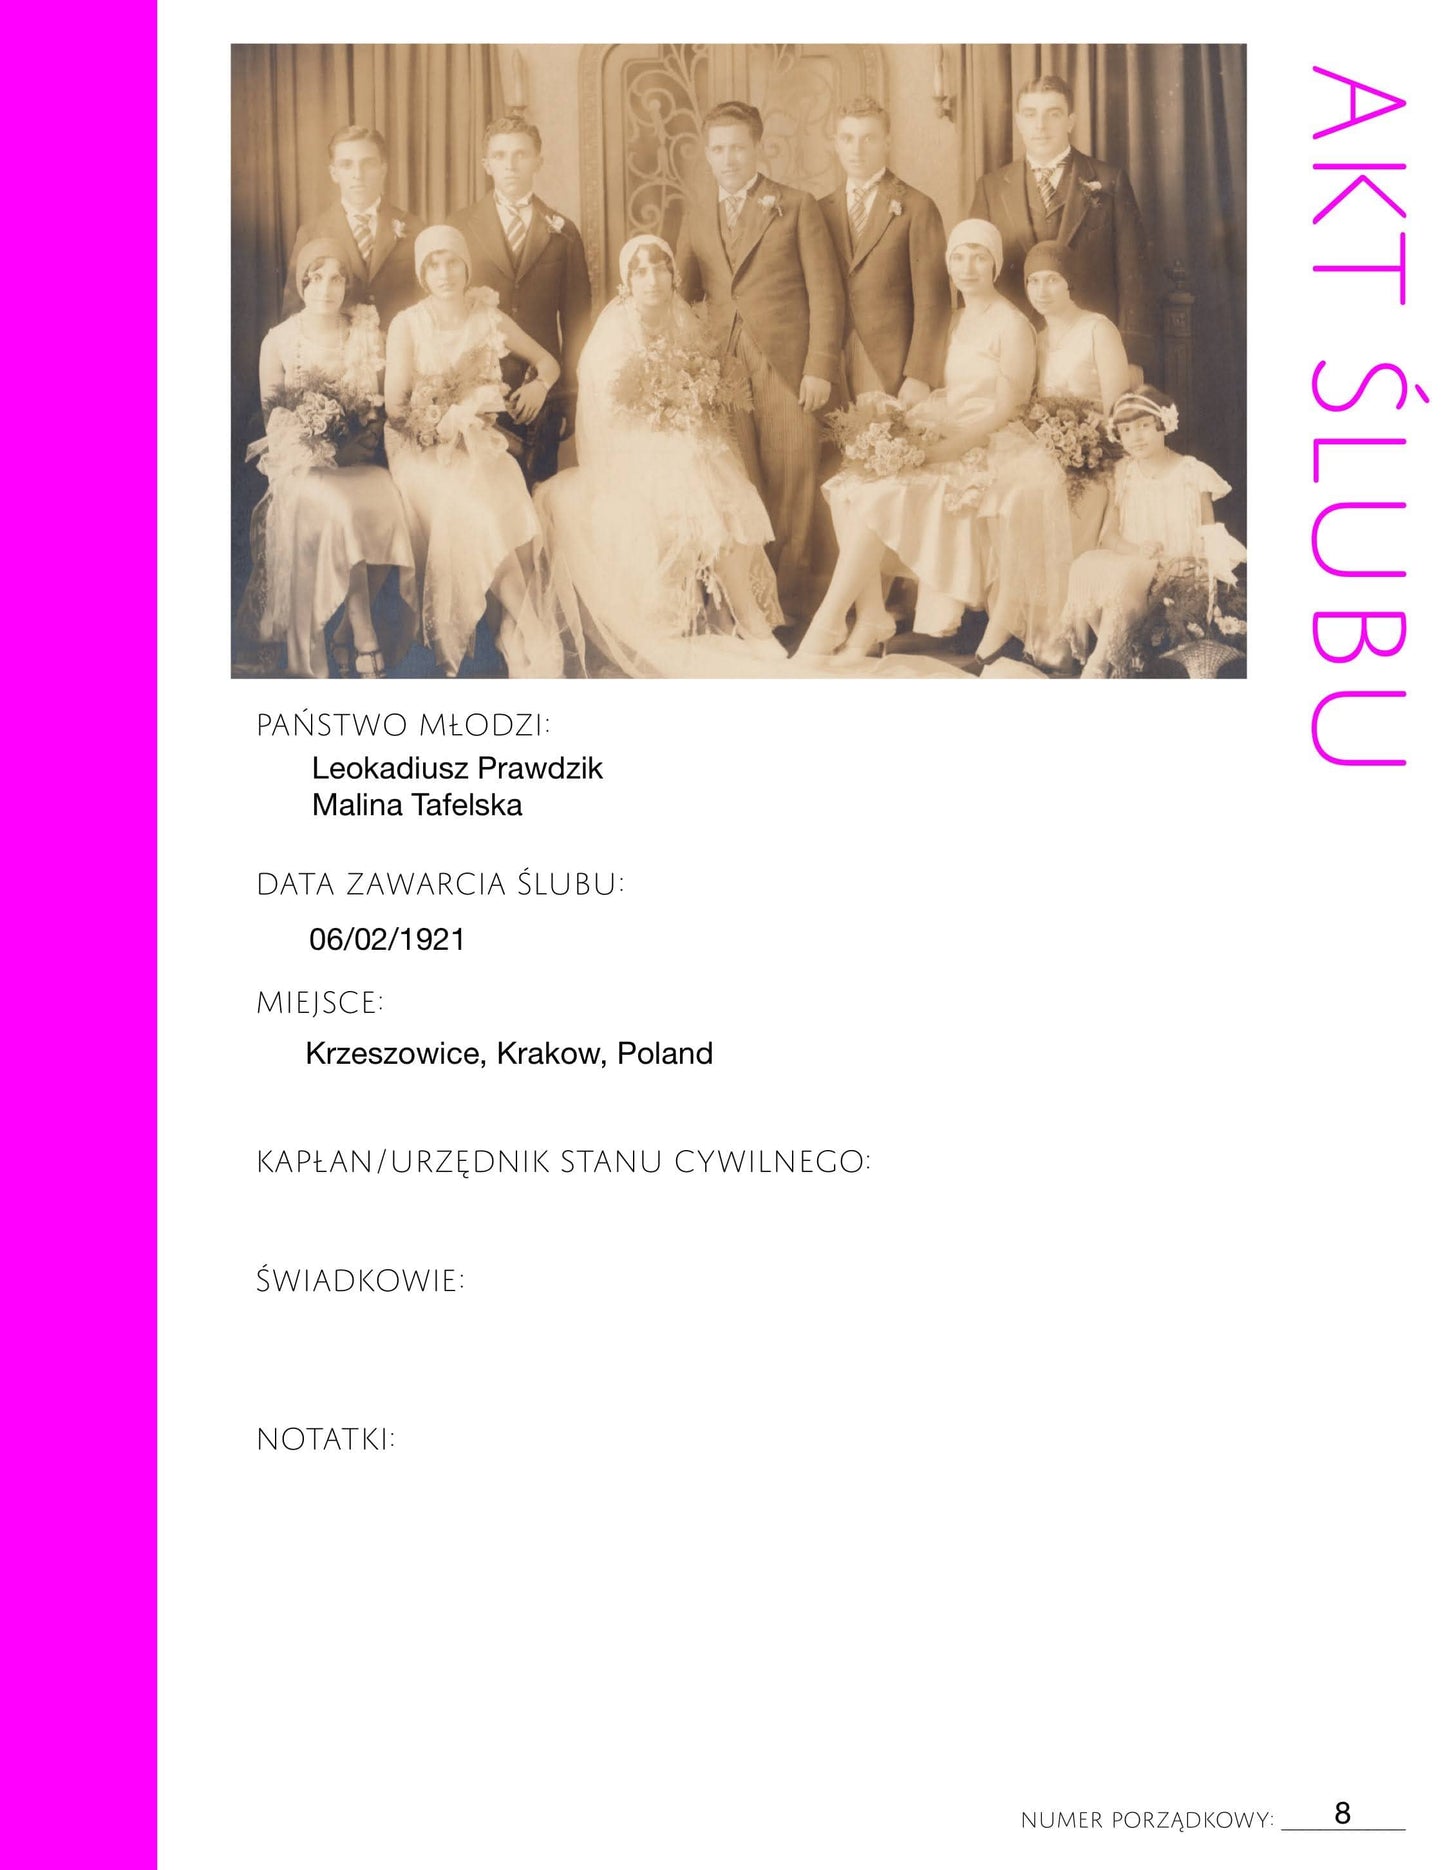 Deluxe Genealogy Pages in Polish /// 200-Page Family History Bundle - Fuchsia (Digital Download)